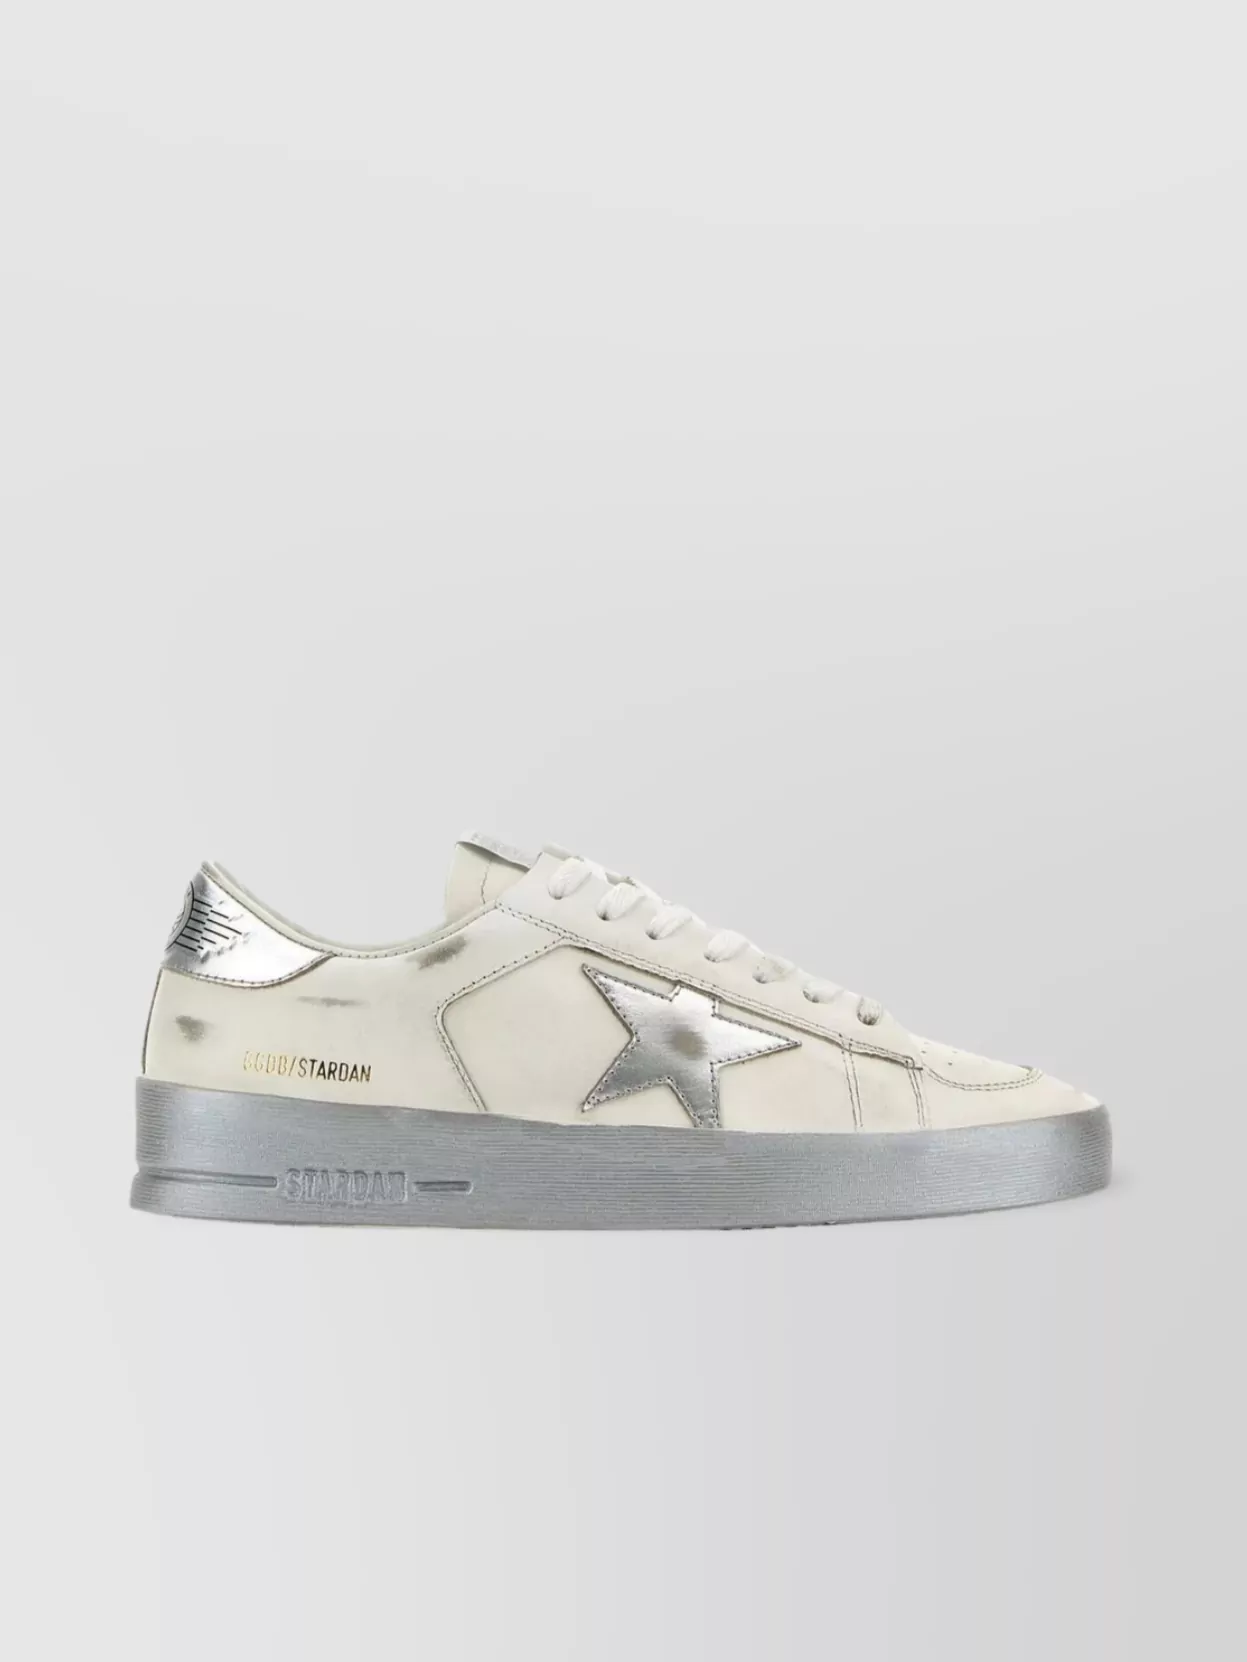 Shop Golden Goose Stardan Sneakers With Intentional Surface Dirt In Cream